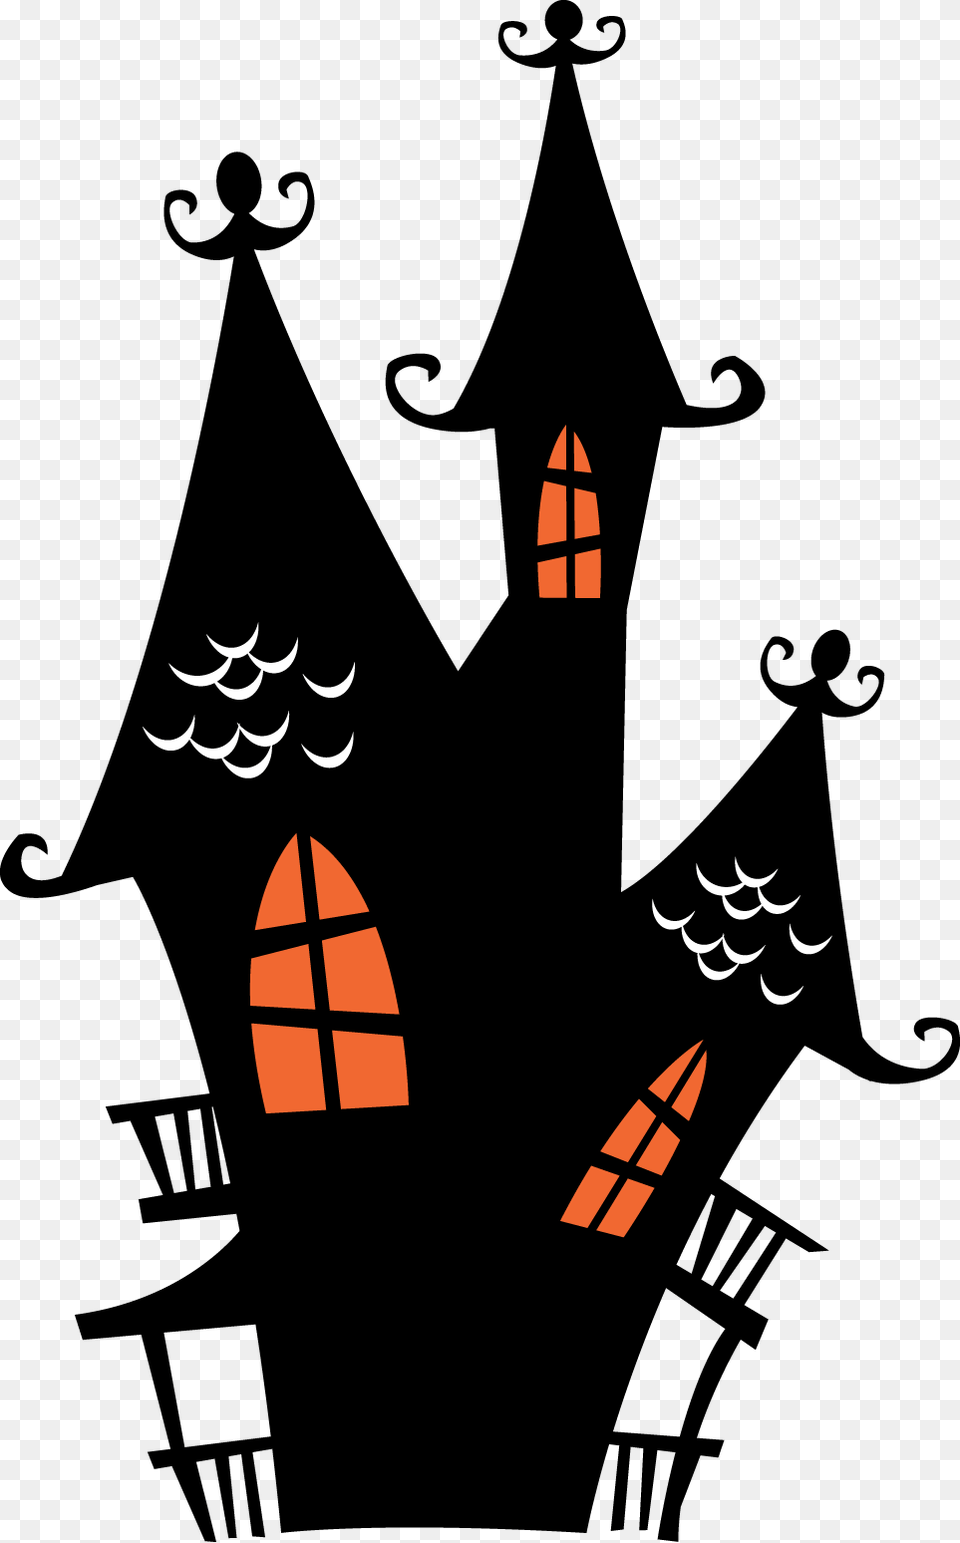 Haunted Oh My Fiesta In English Transparent Background Halloween Clip Art, Festival Png Image